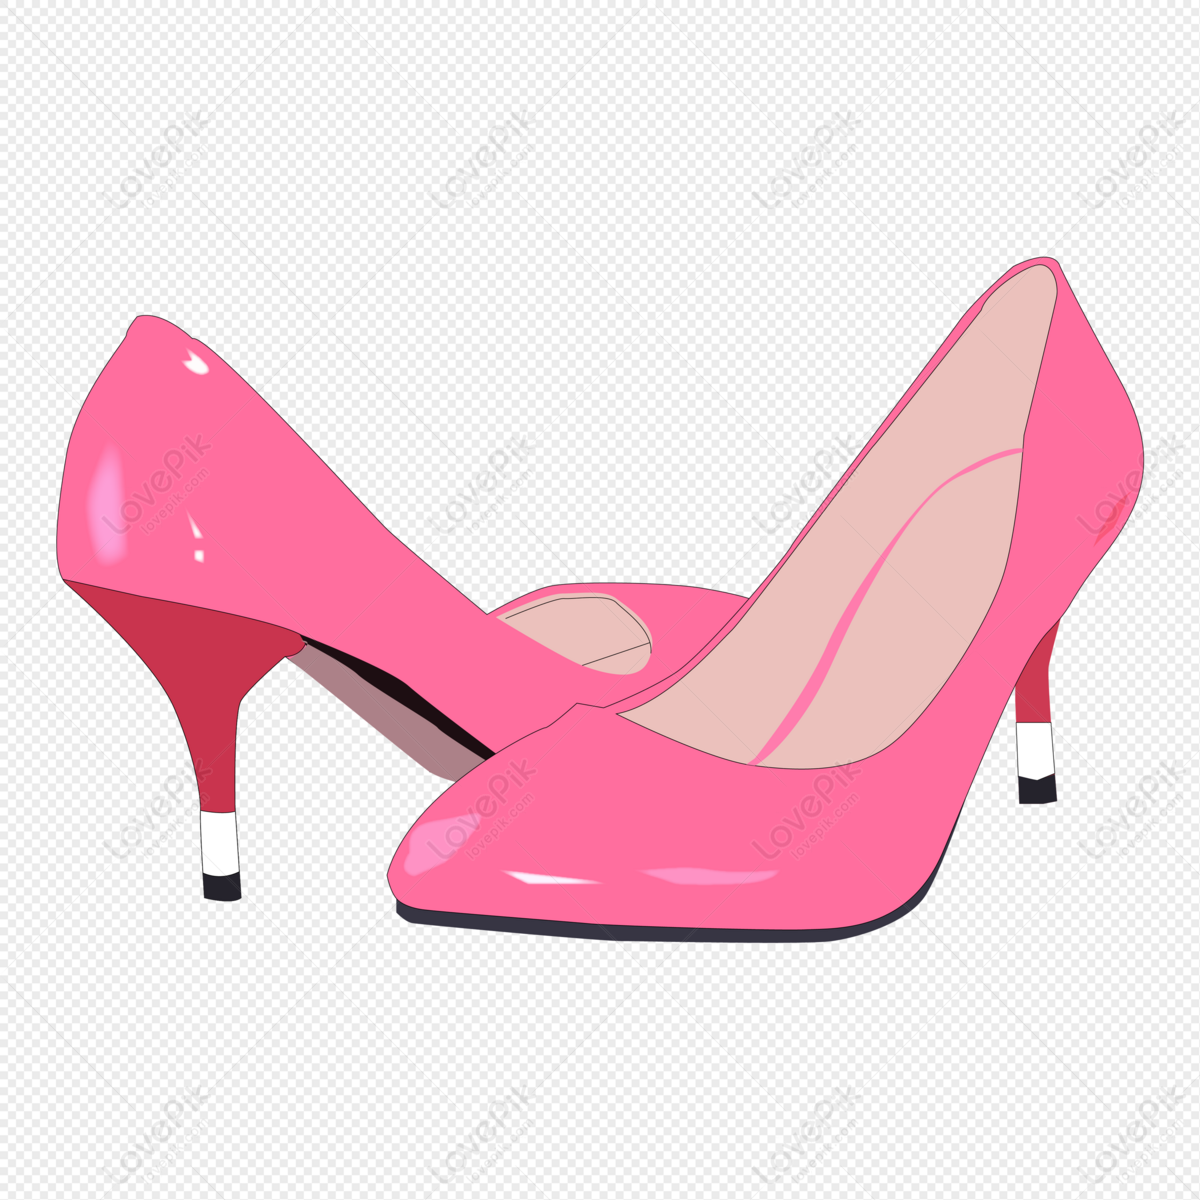 Cartoon Hand Painted Pink Ladies High Heel Leather Shoes Free PNG And  Clipart Image For Free Download - Lovepik | 401405209